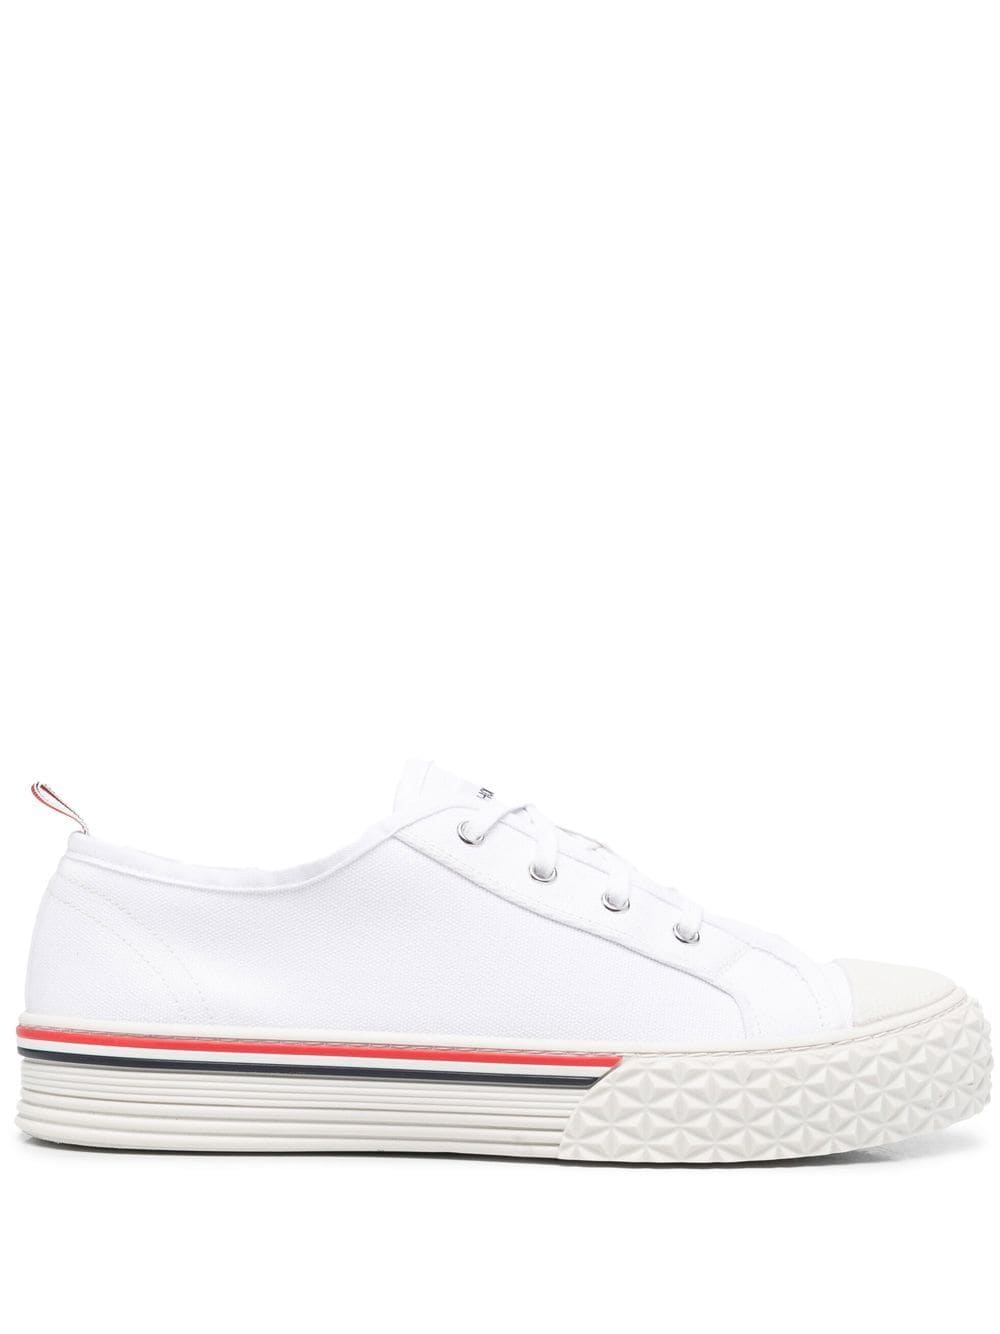 Thom Browne stripe-trim lace-up sneakers - White